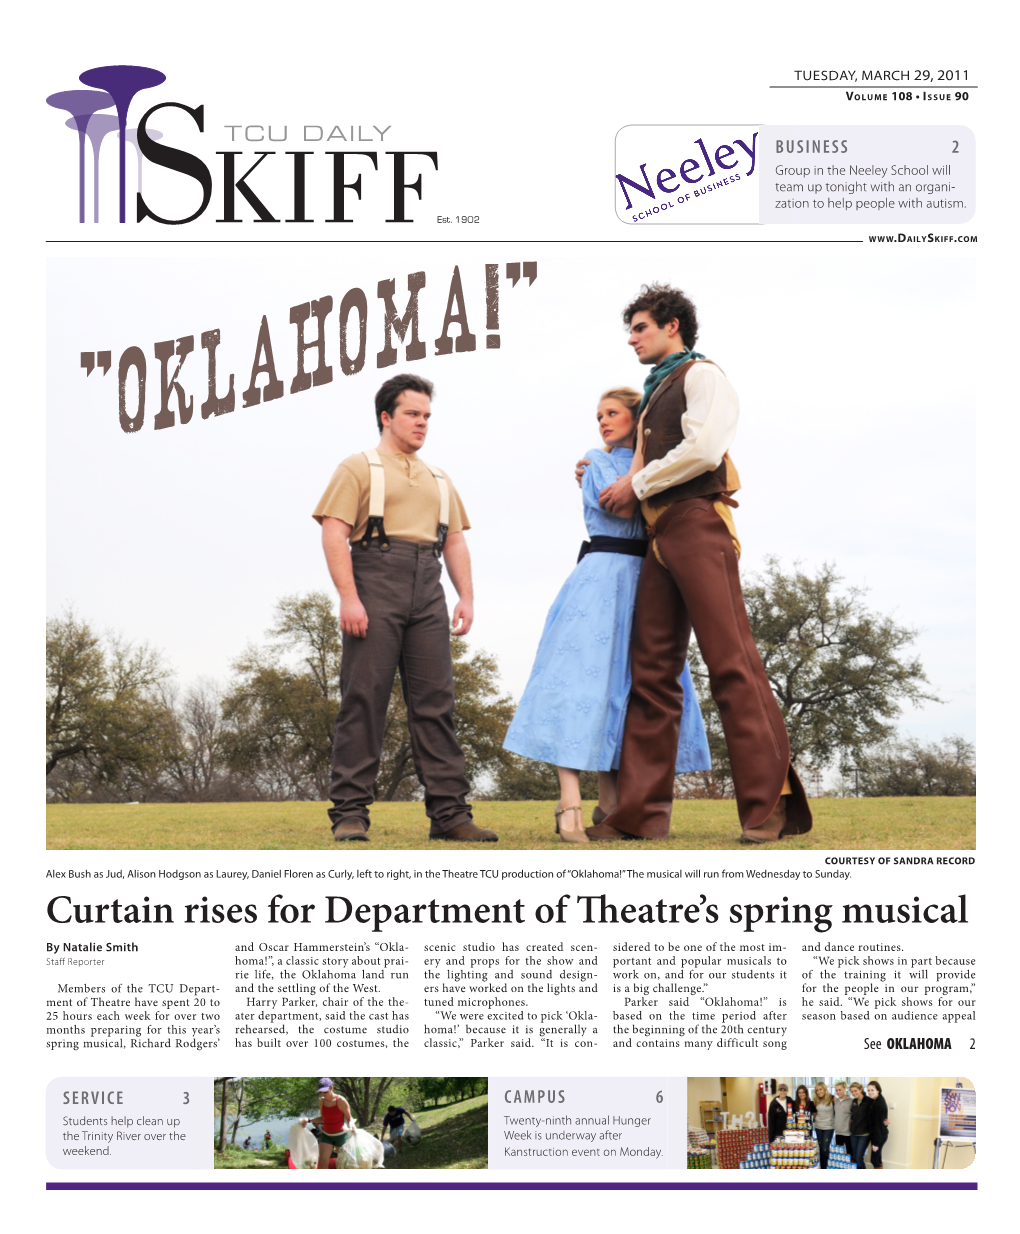 Curtain Rises for Department of Theatre's Spring Musical